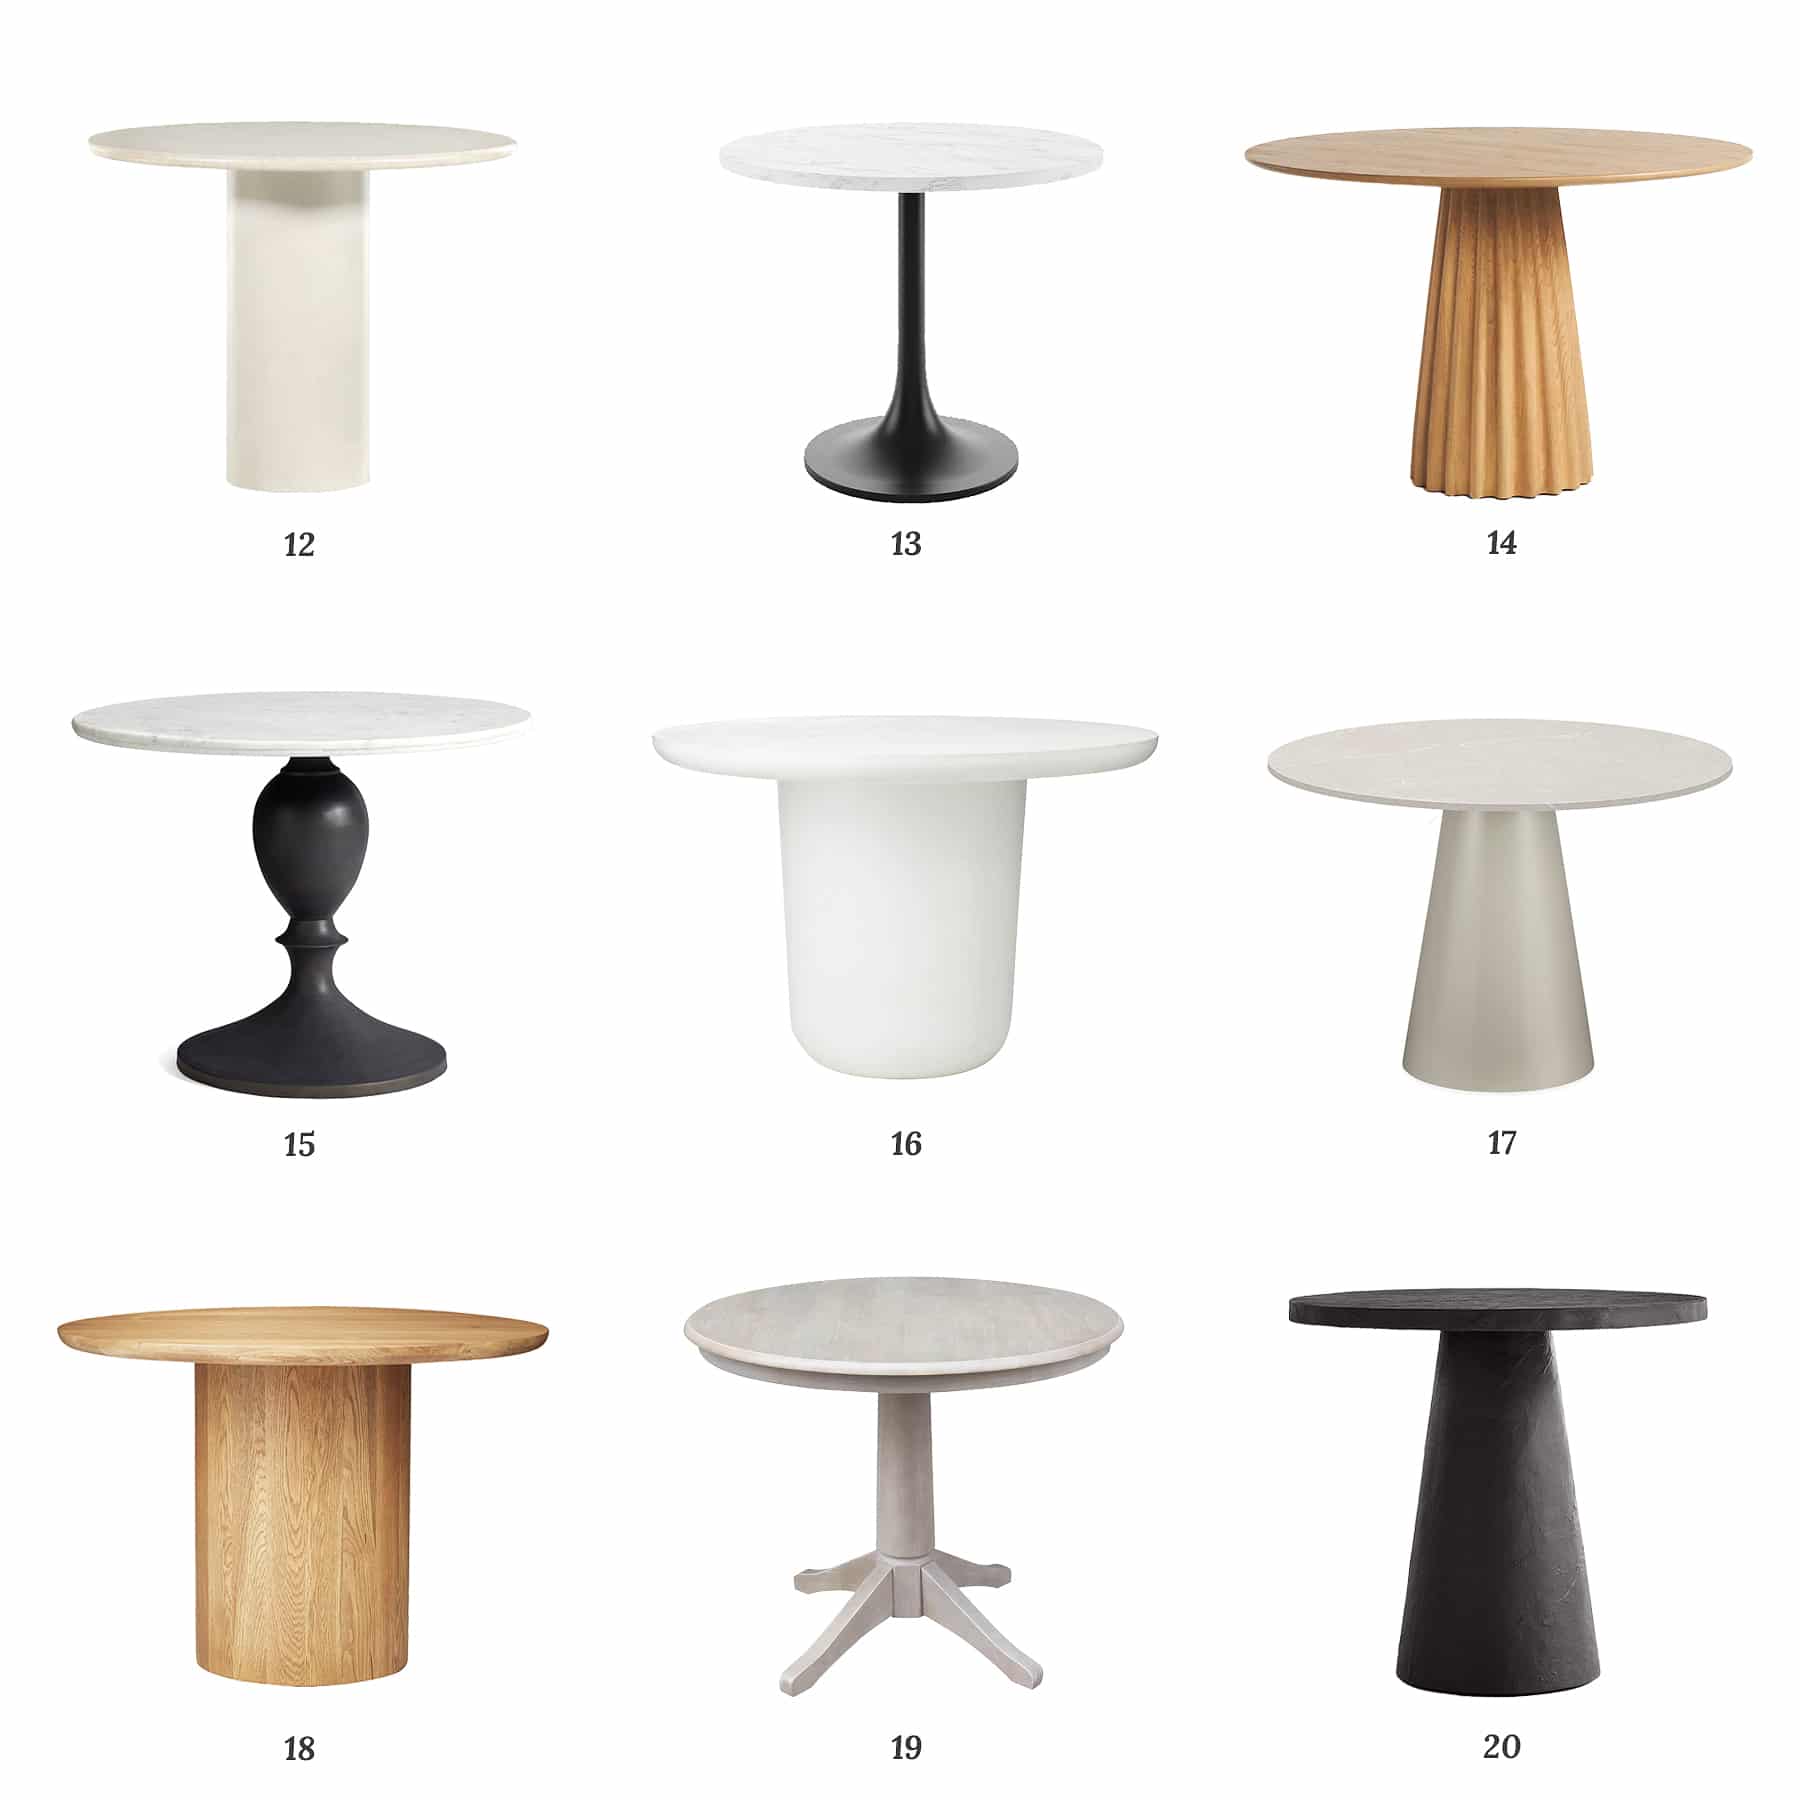 A round-u of 20 4-top pedestal tables we considered for our kitchen renovation | via Yellow Brick Home

pedestal tables, 4-top tables, bistro tables, 4 seater tables, small kitchen table